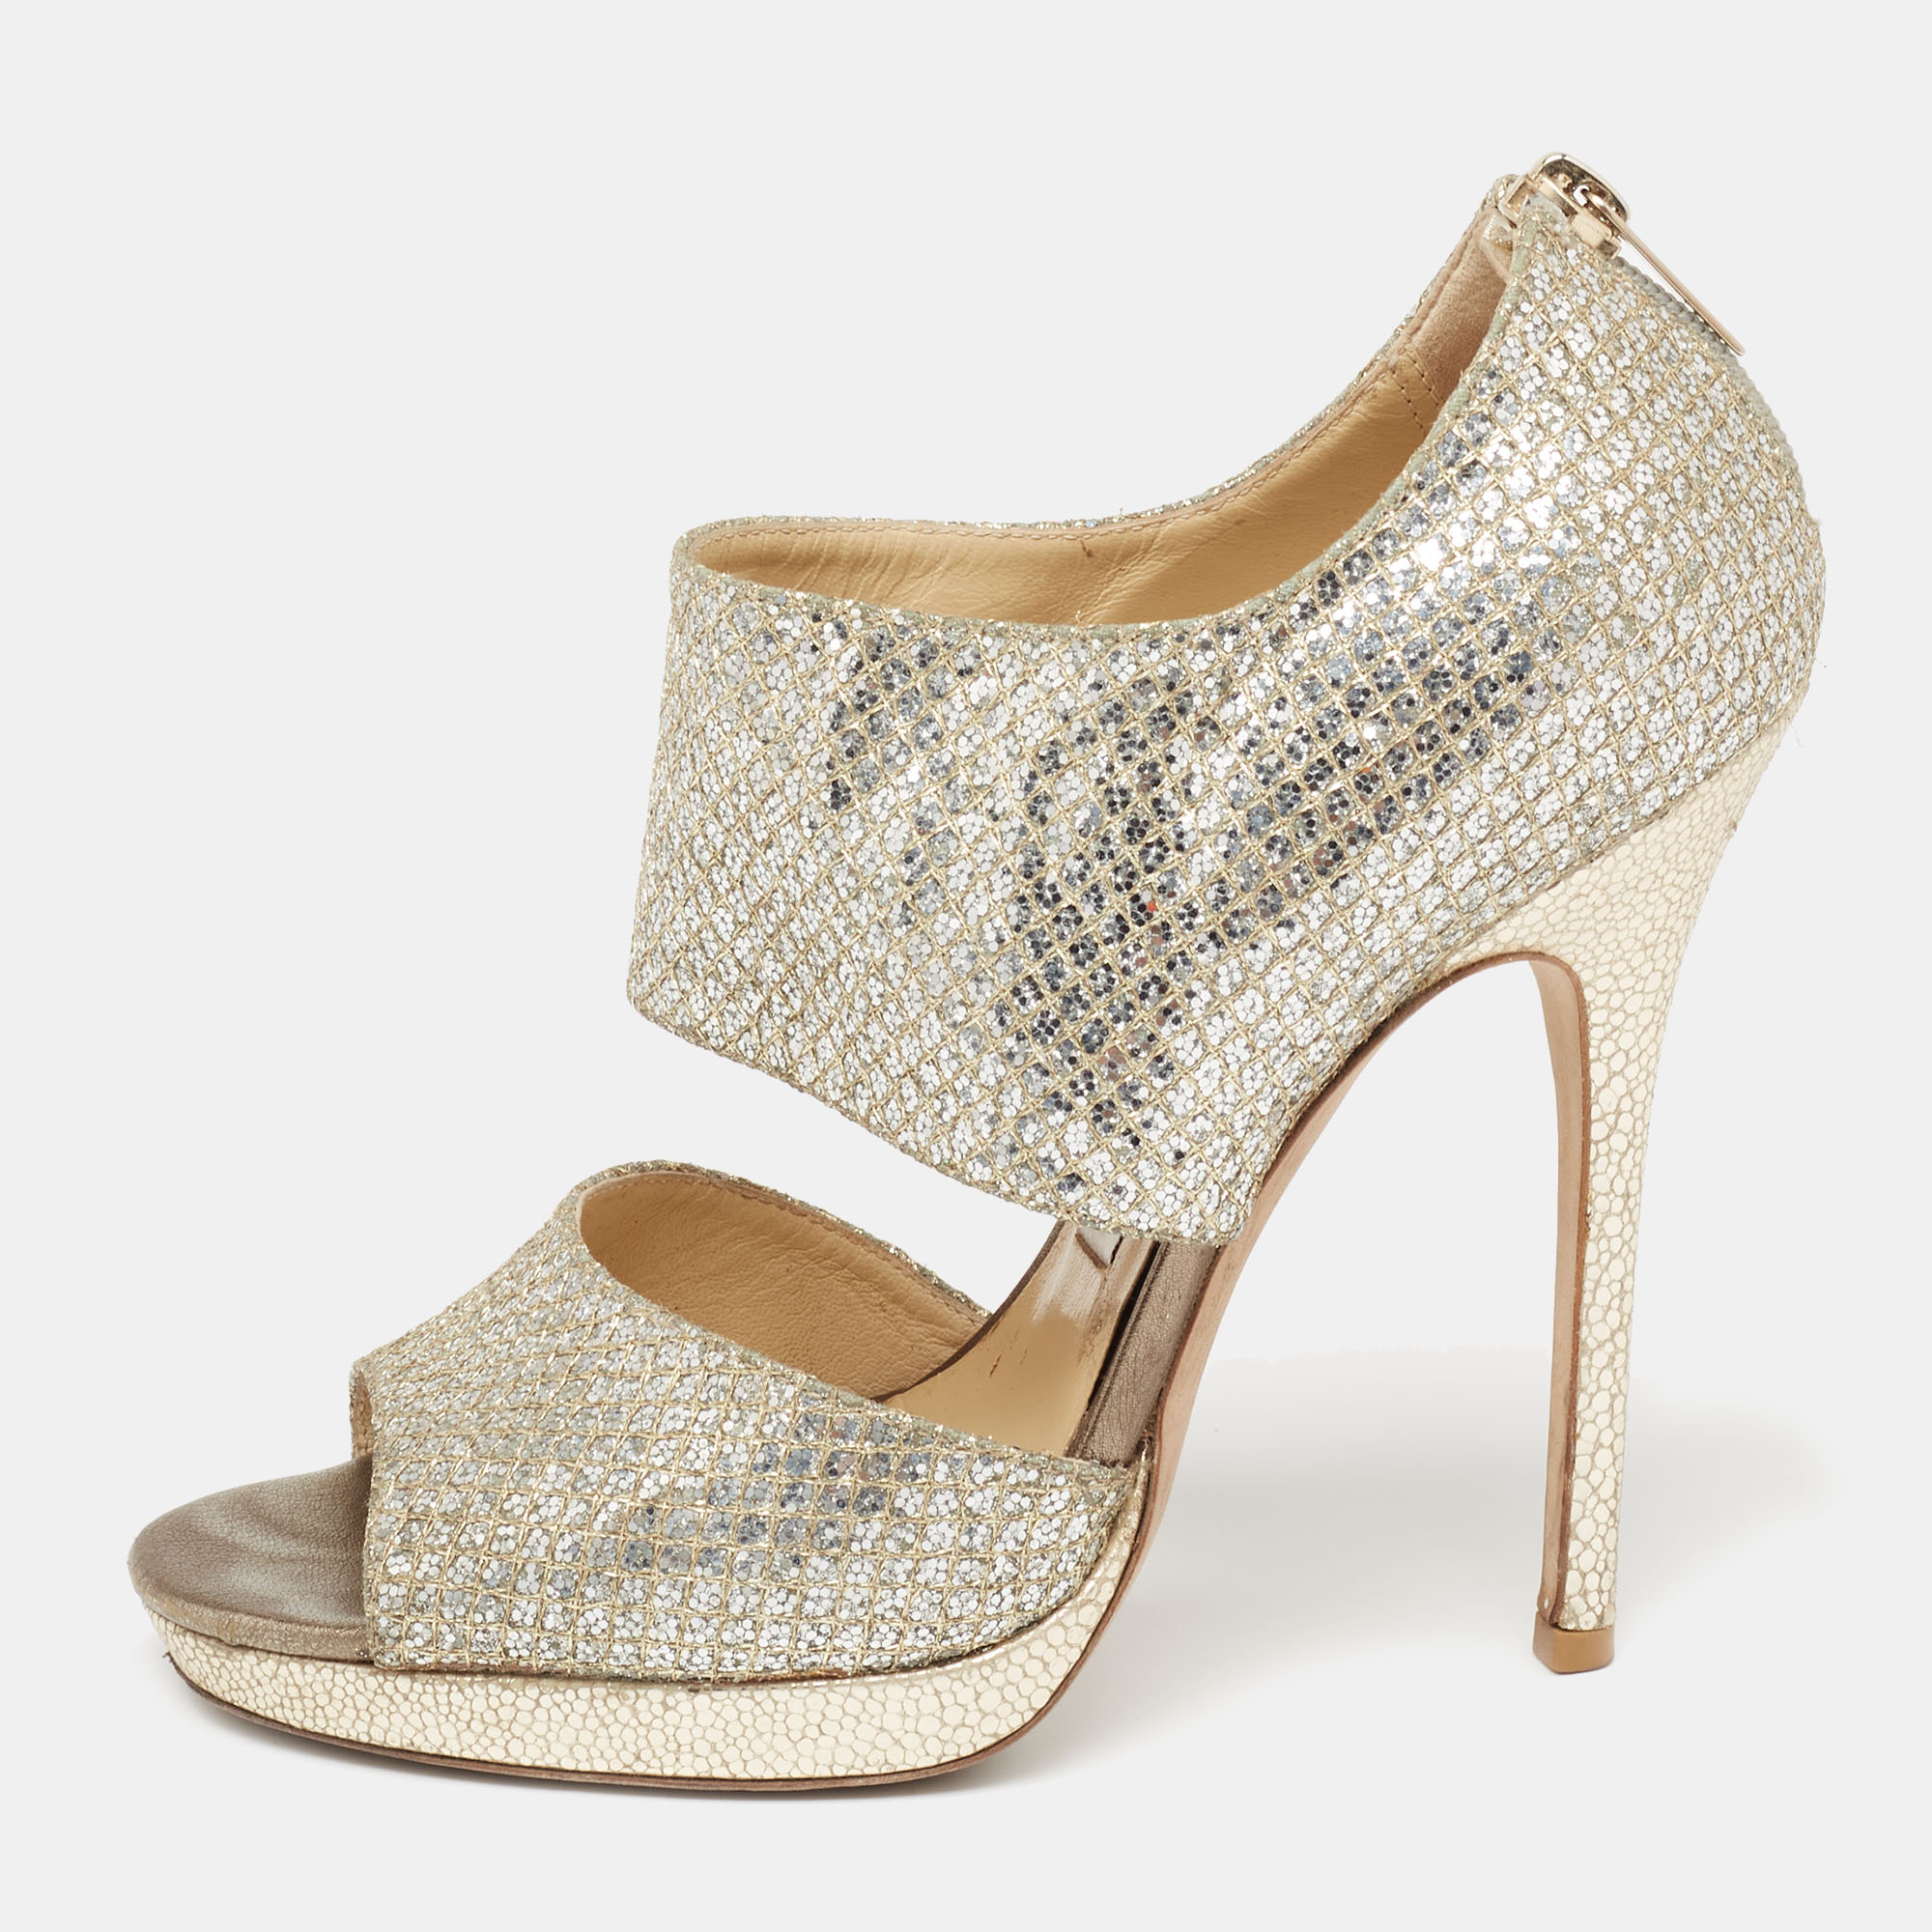 Pre-owned Jimmy Choo Silver/gold Coarse Glitter Private Platform Sandals Size 37